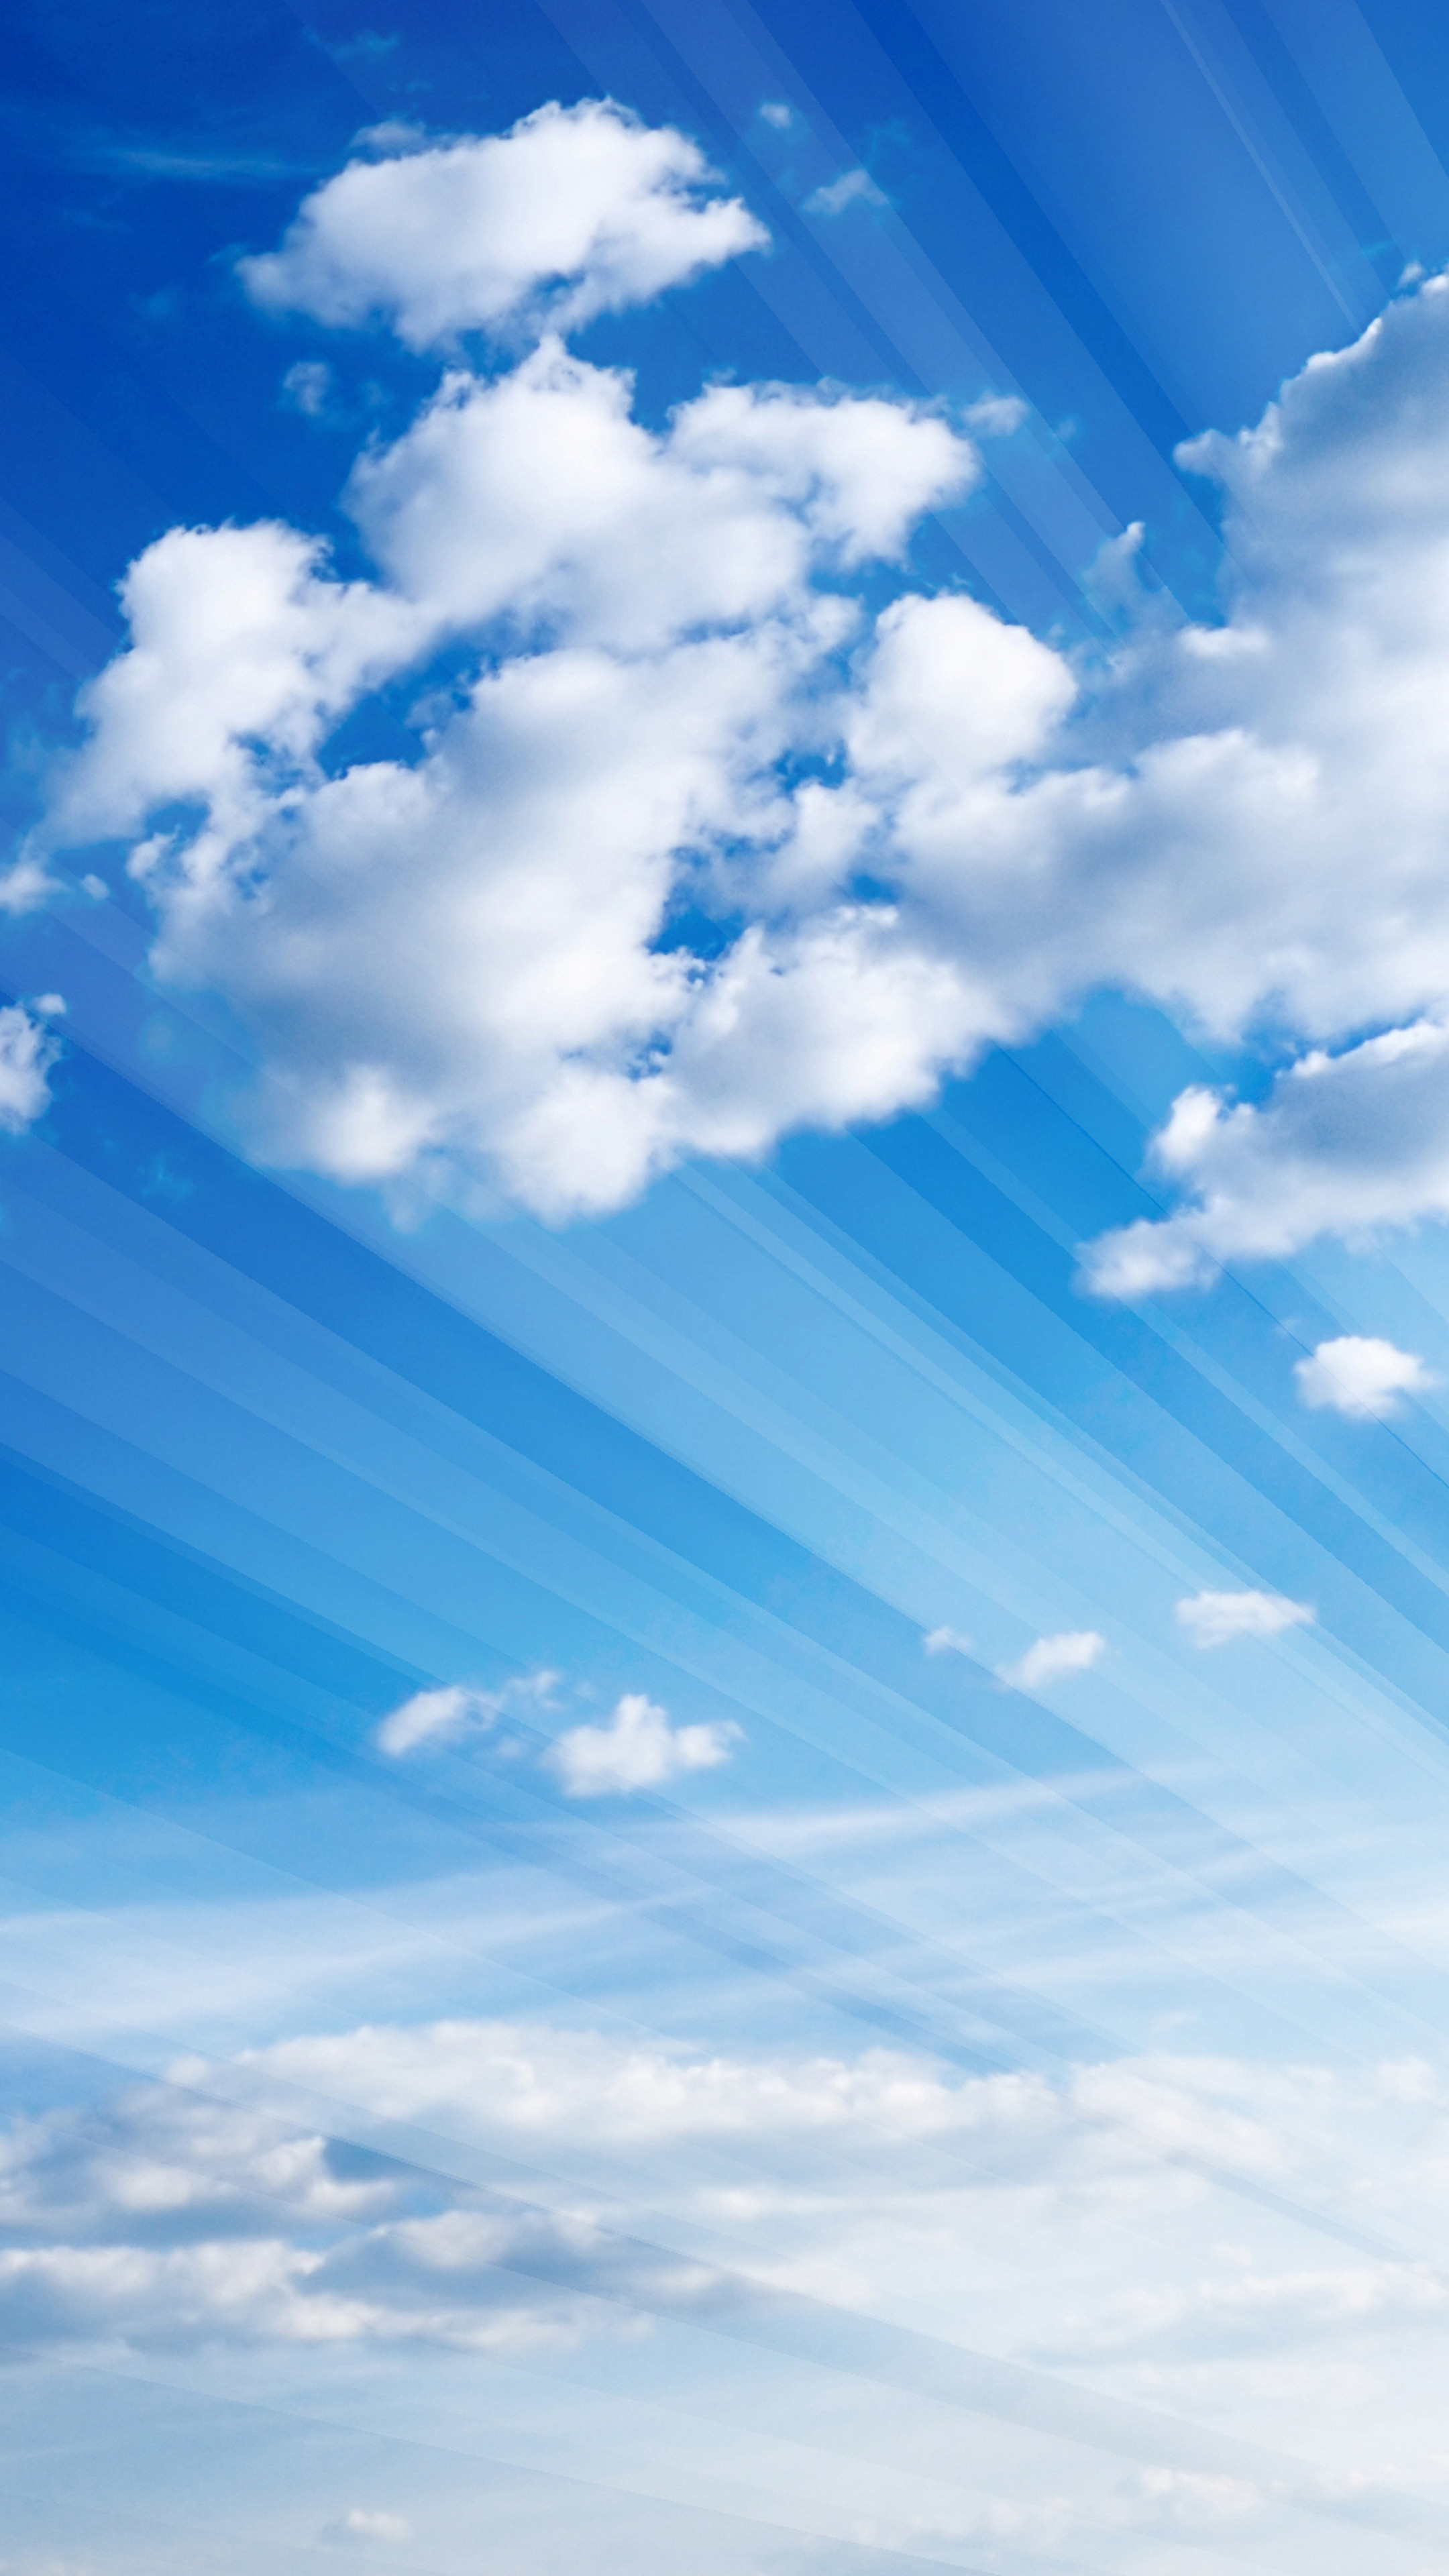 Wallpaper White Clouds and Blue Sky During Daytime Background  Download  Free Image